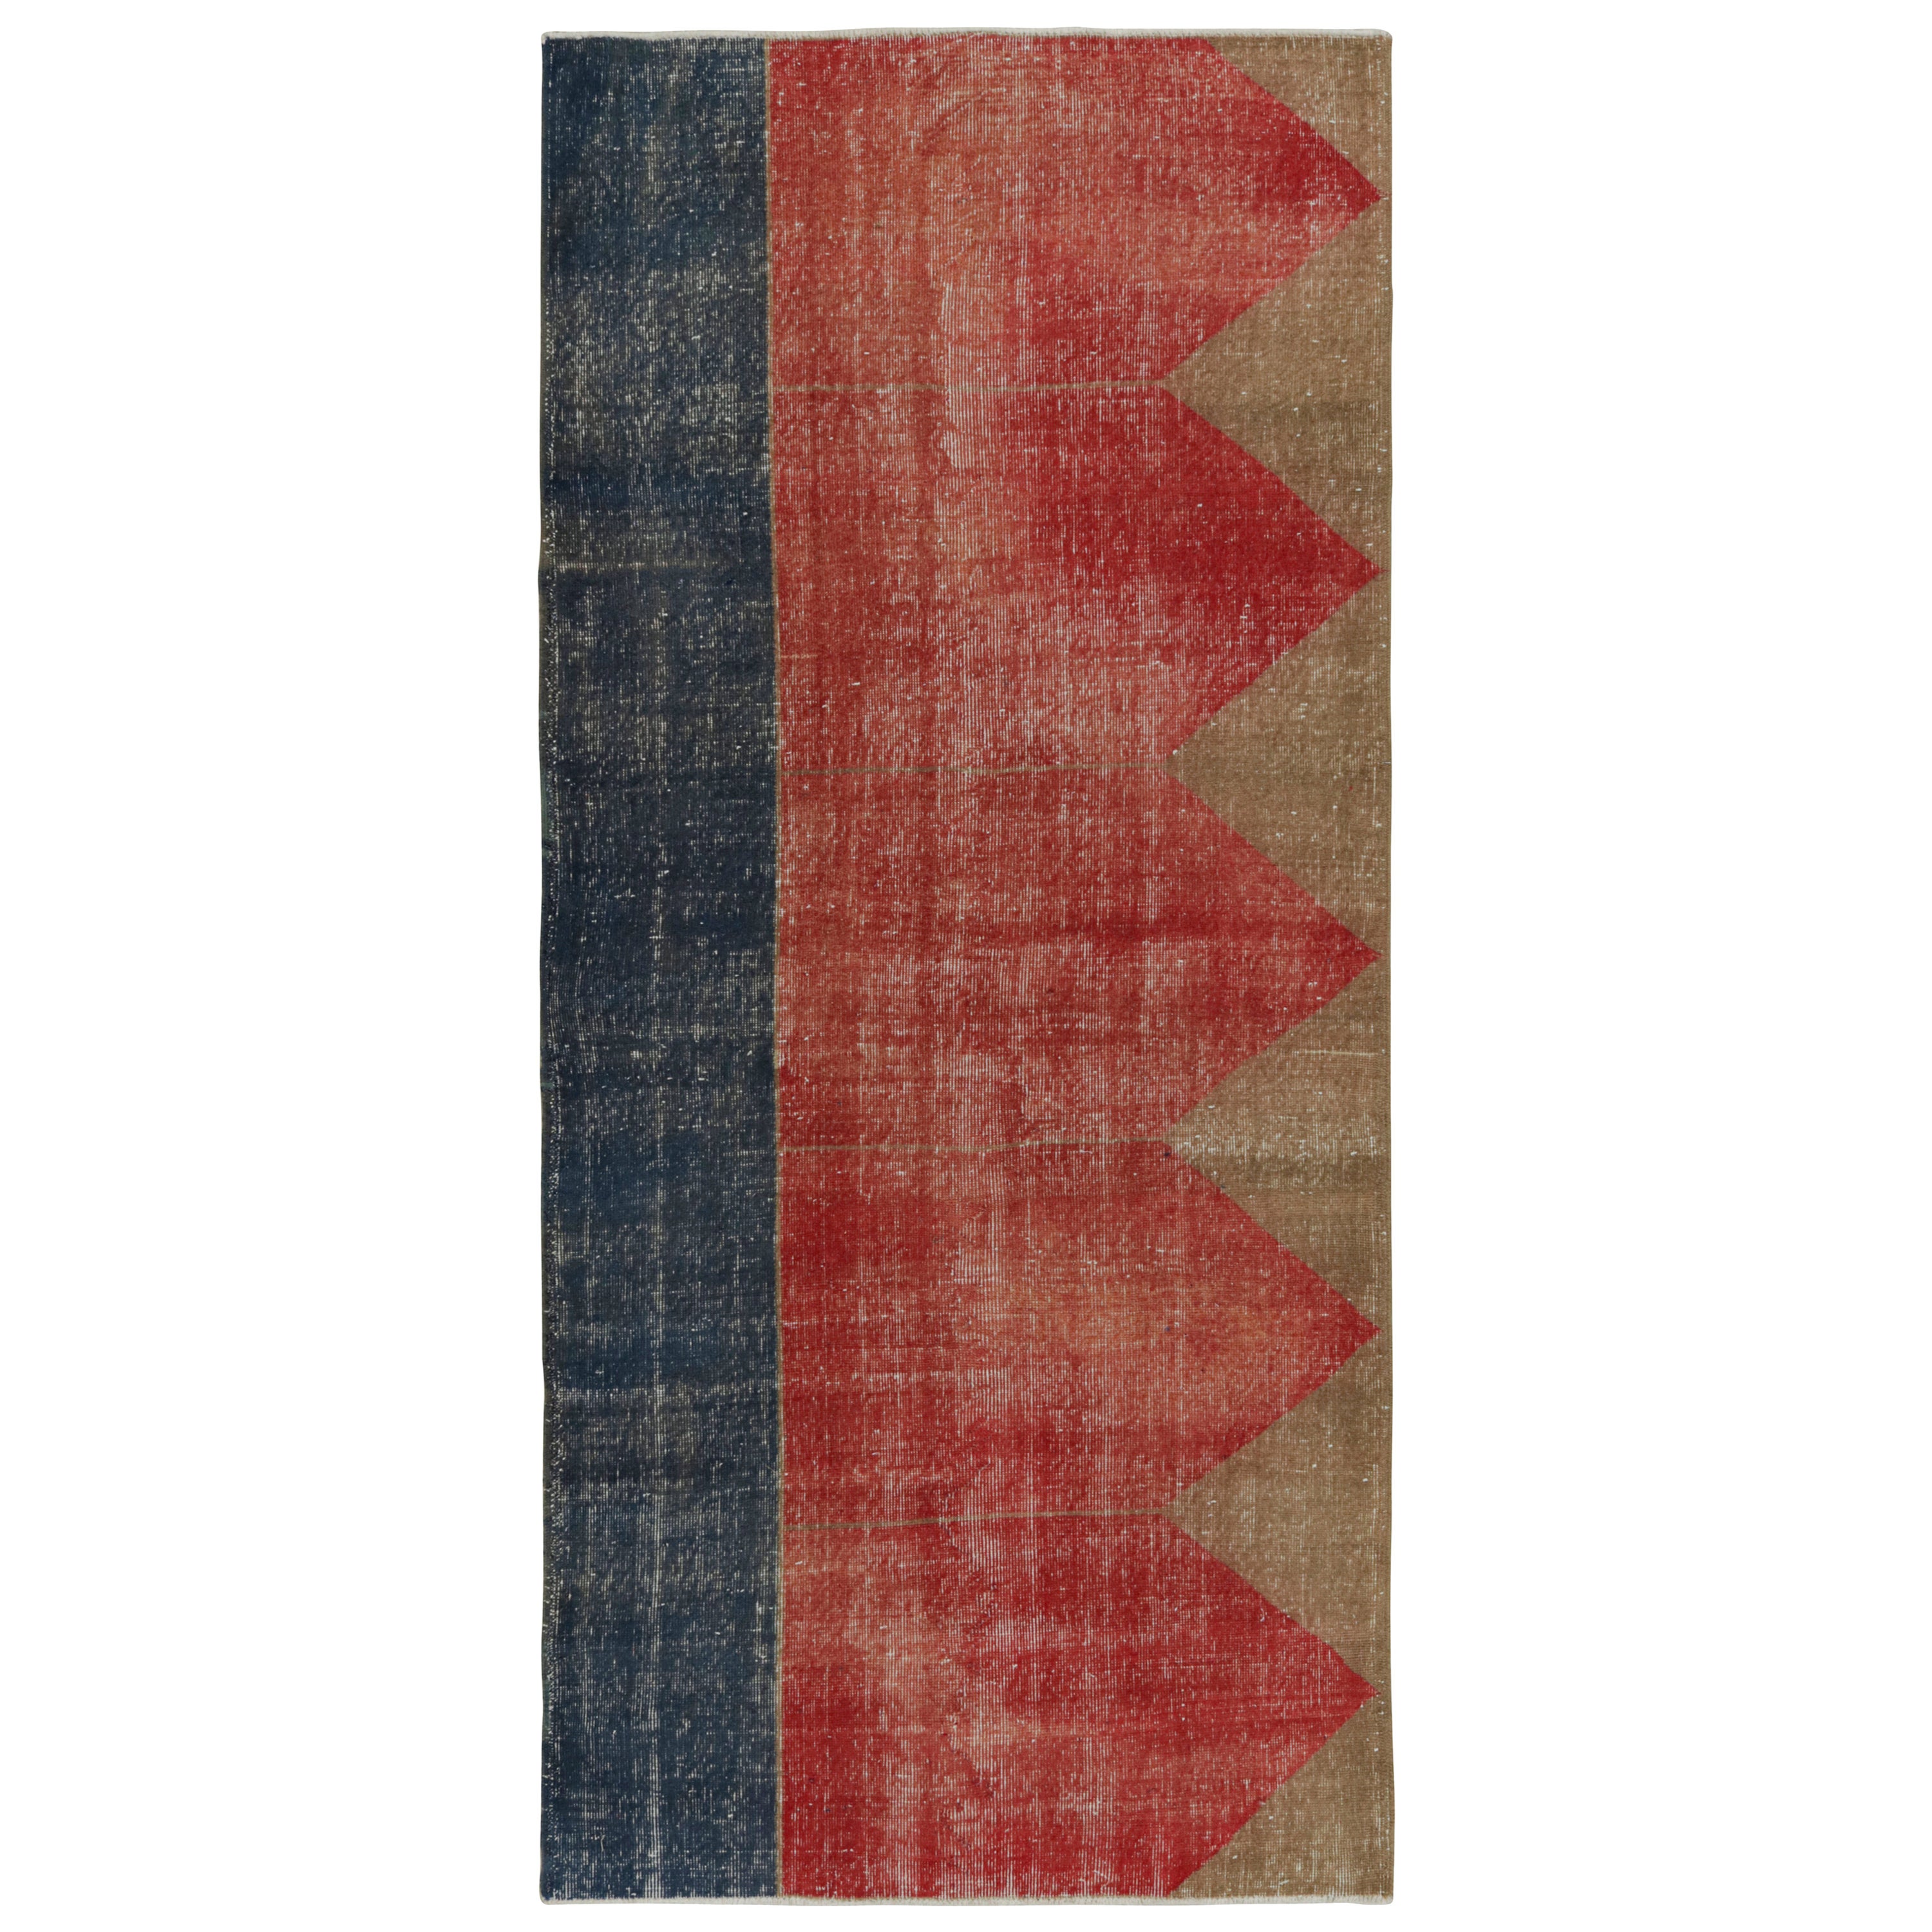 Vintage Turkish Rug in Red, with Geometric Patterns, from Rug & Kilim